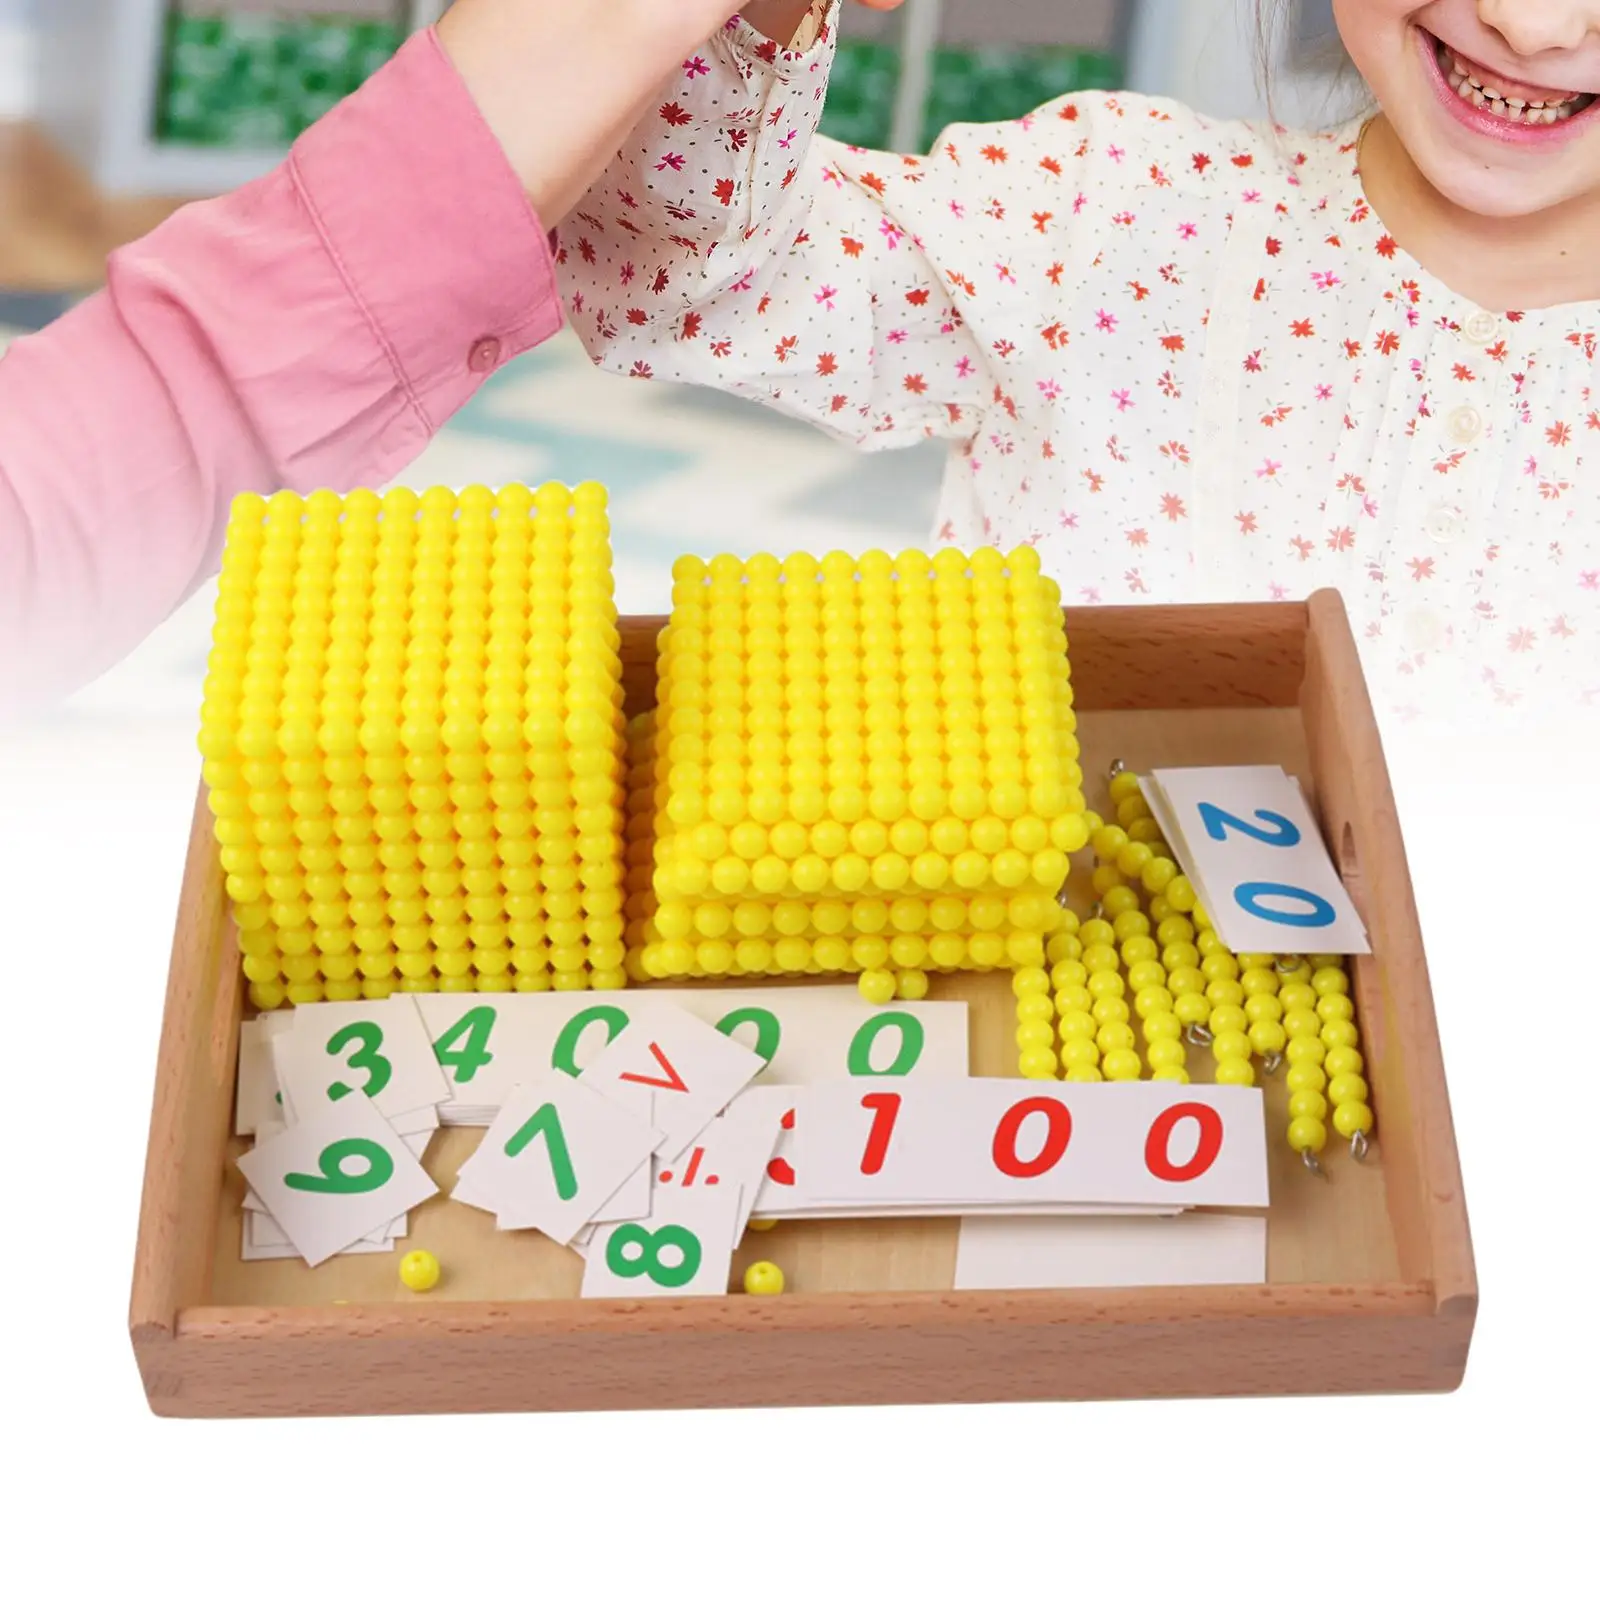 Math Counting Beads Number Concepts Hands On for Education Preschool Children